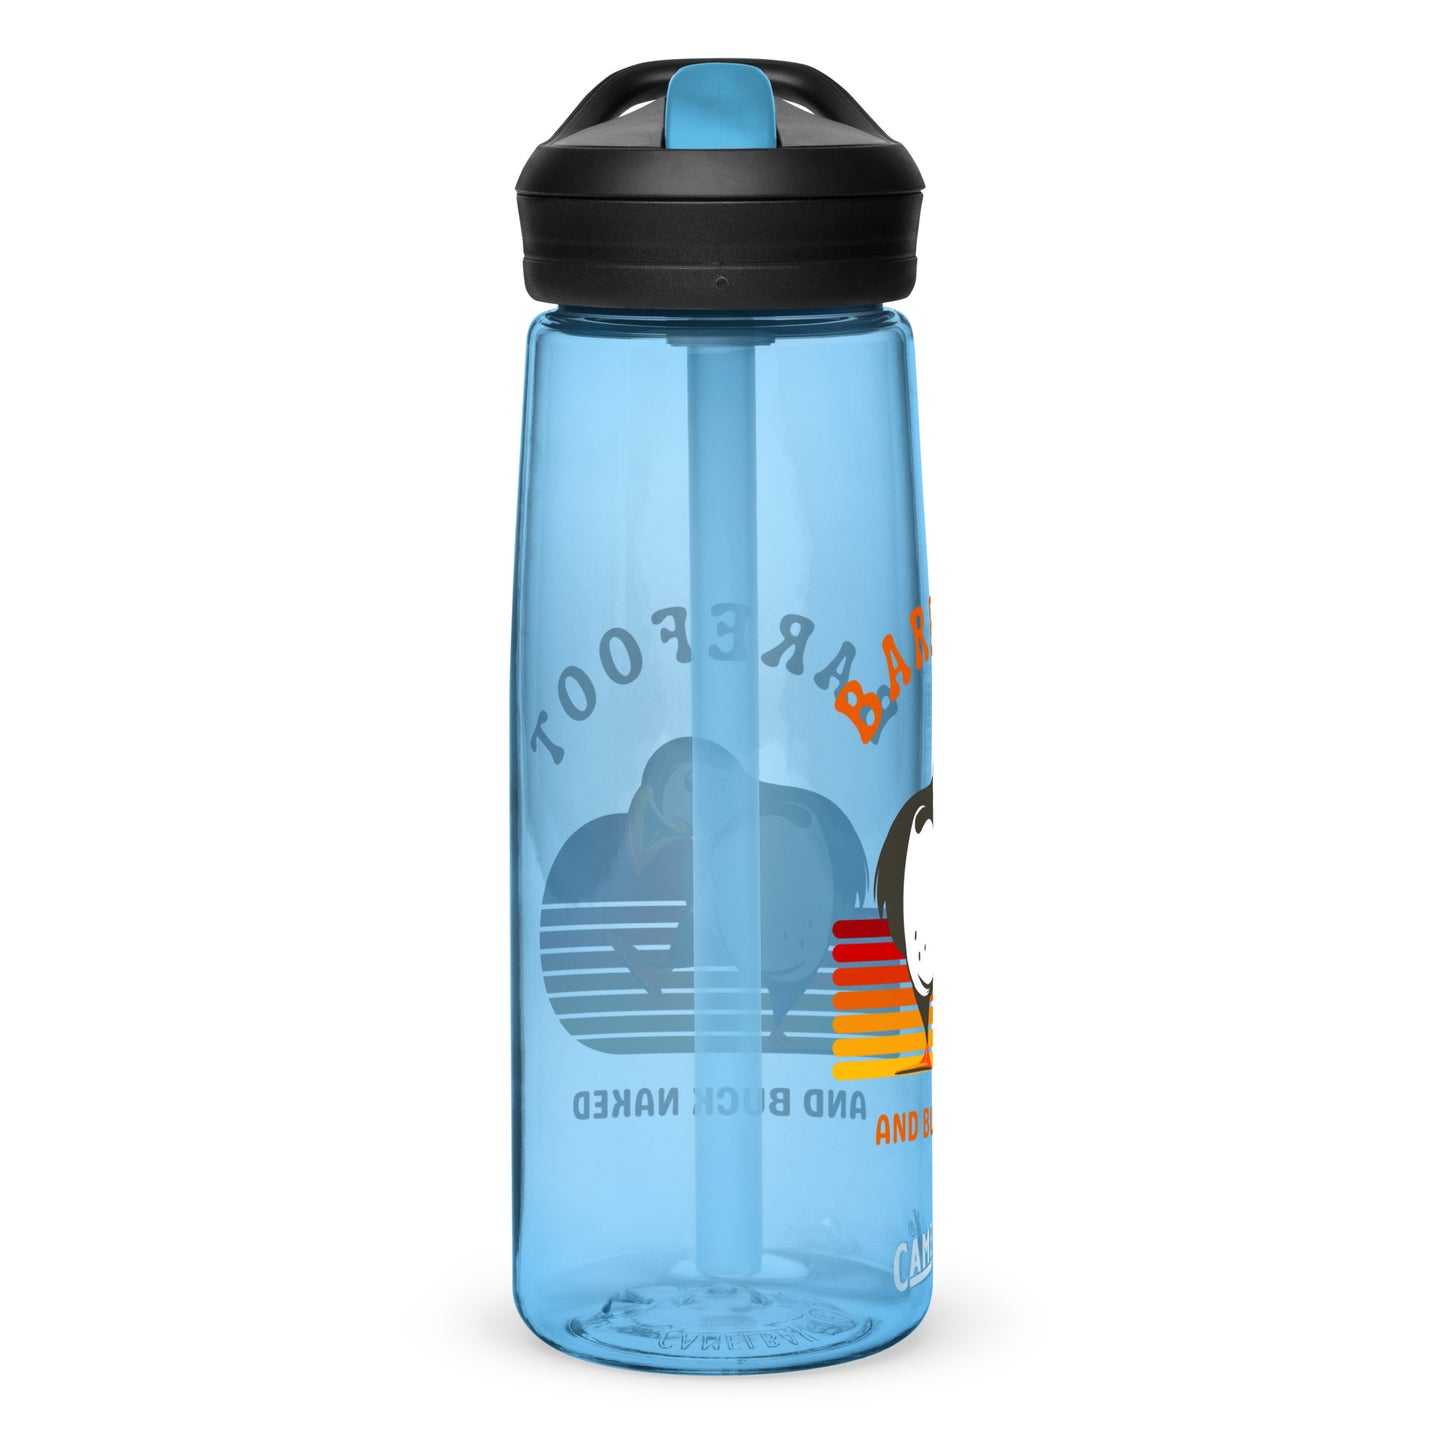 Barefoot and Buck Naked Sports water bottle